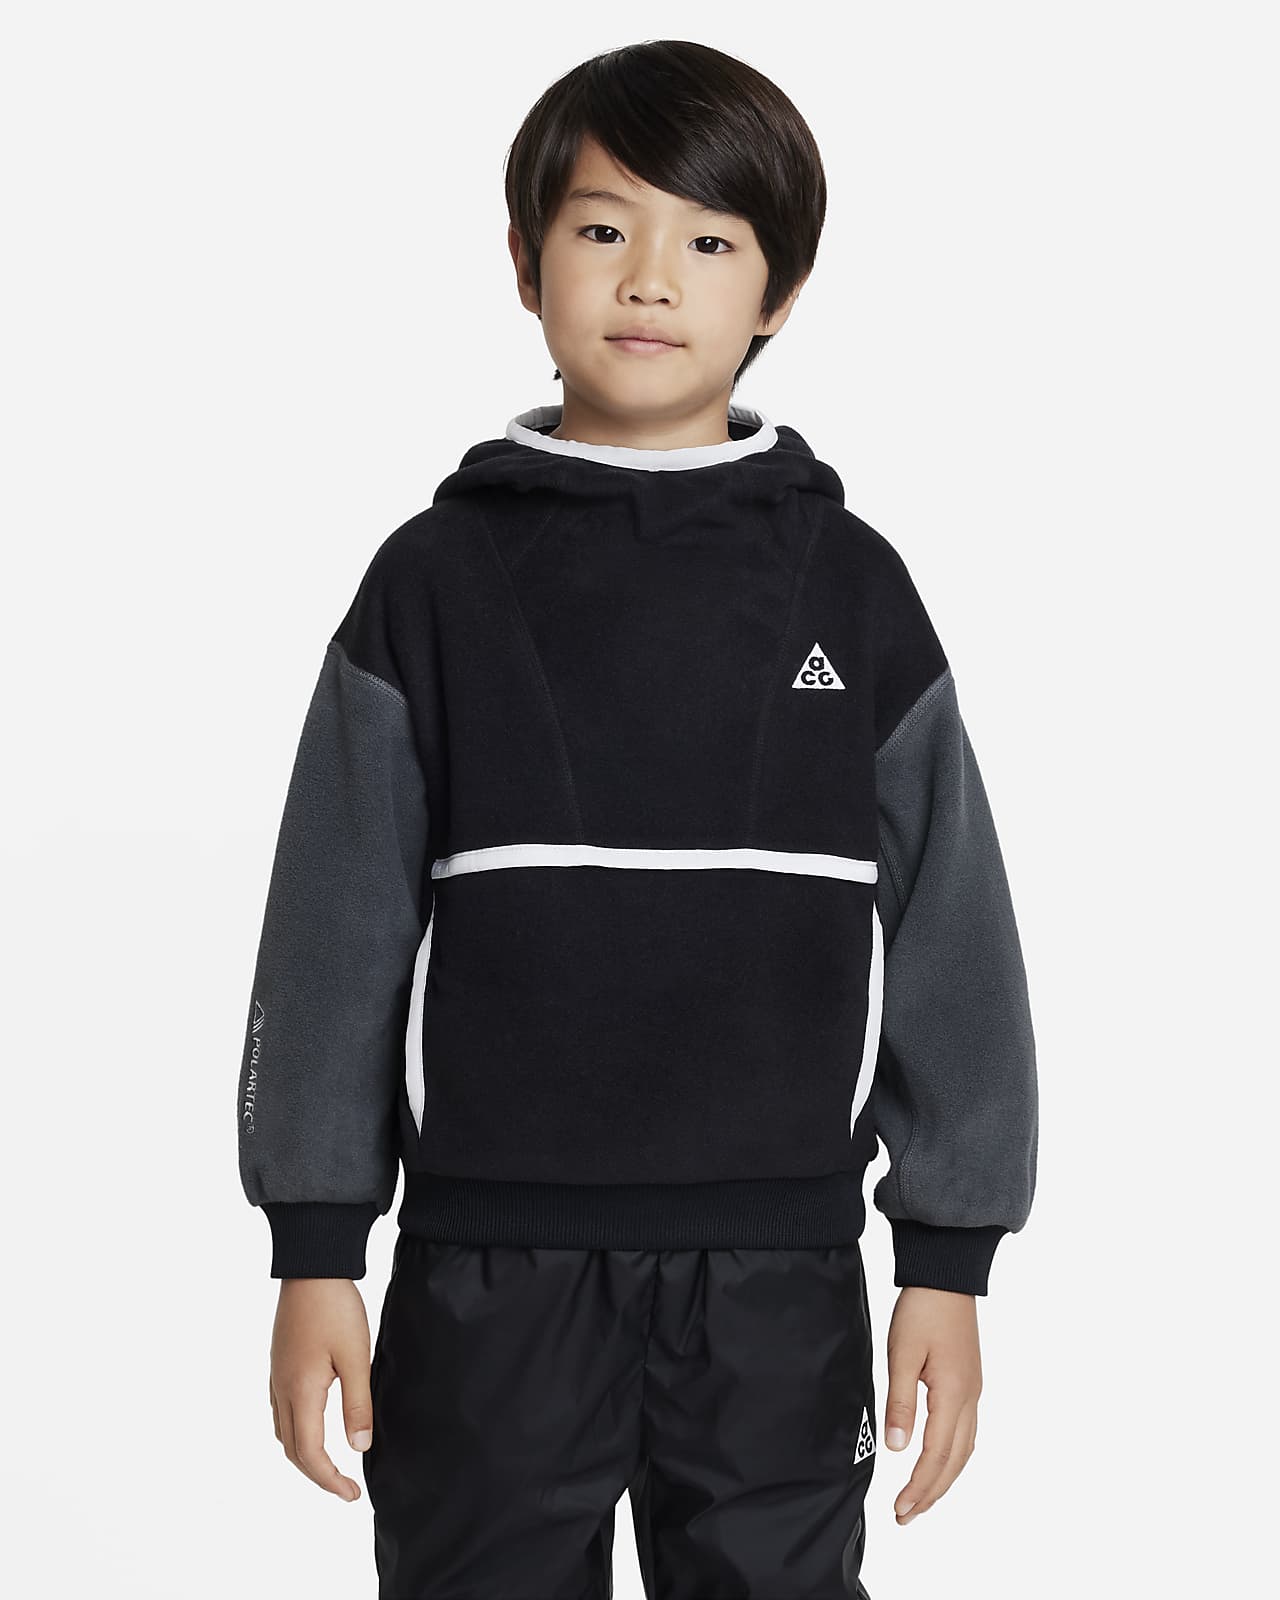 Nike ACG Polartec® 'Wolf Tree' Younger Kids' Pullover Hoodie